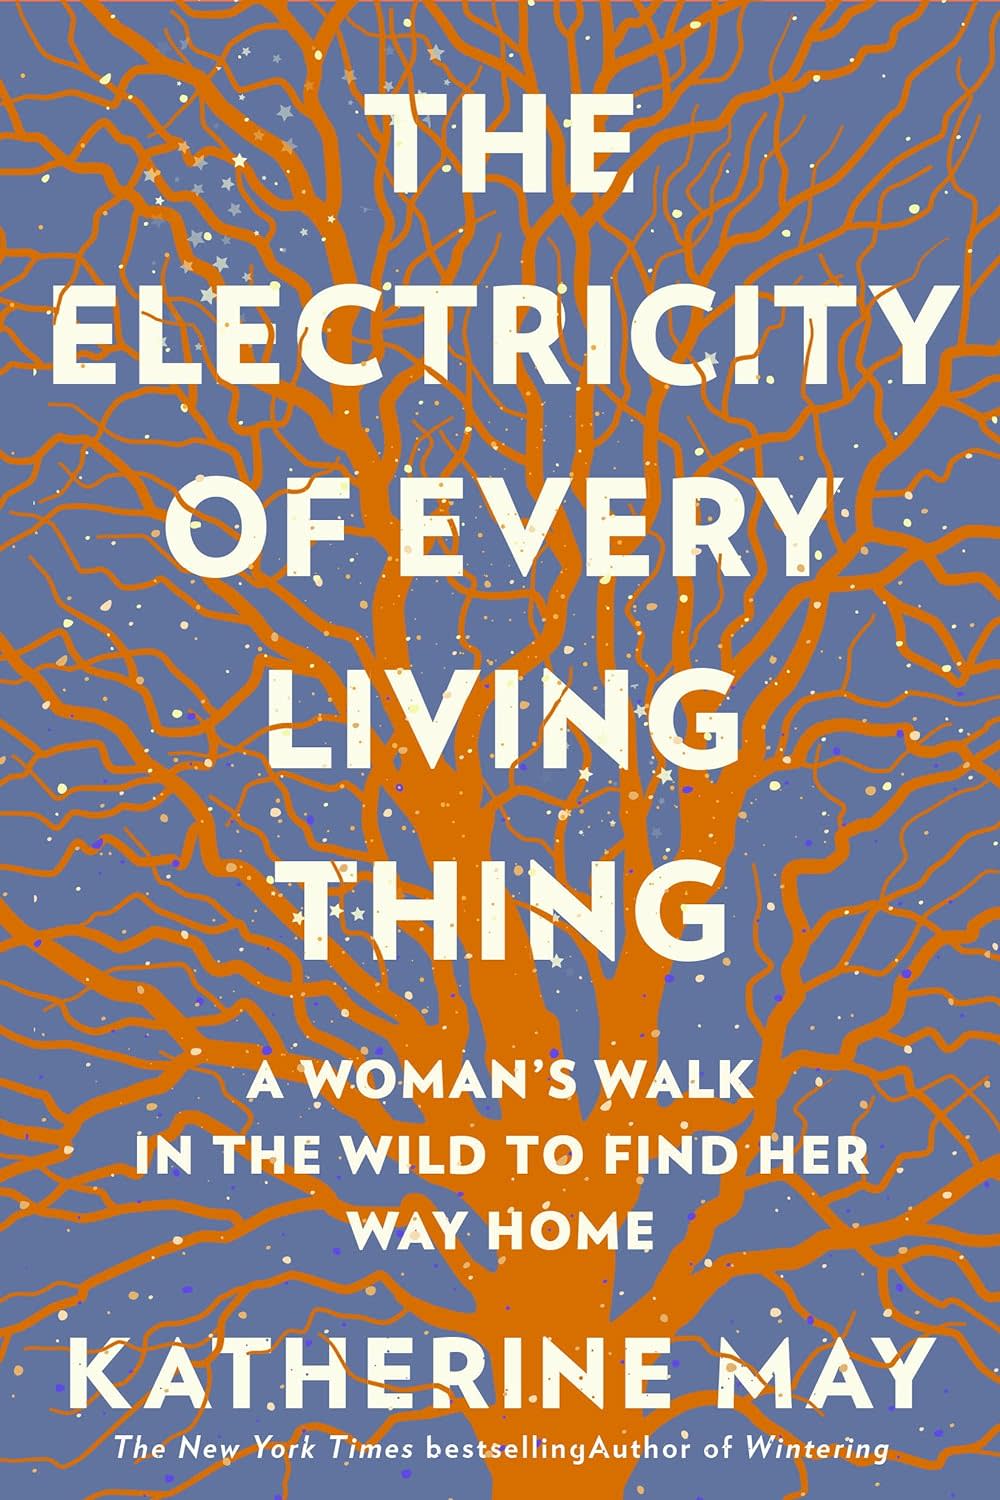 "The Electricity of Every Living Thing"